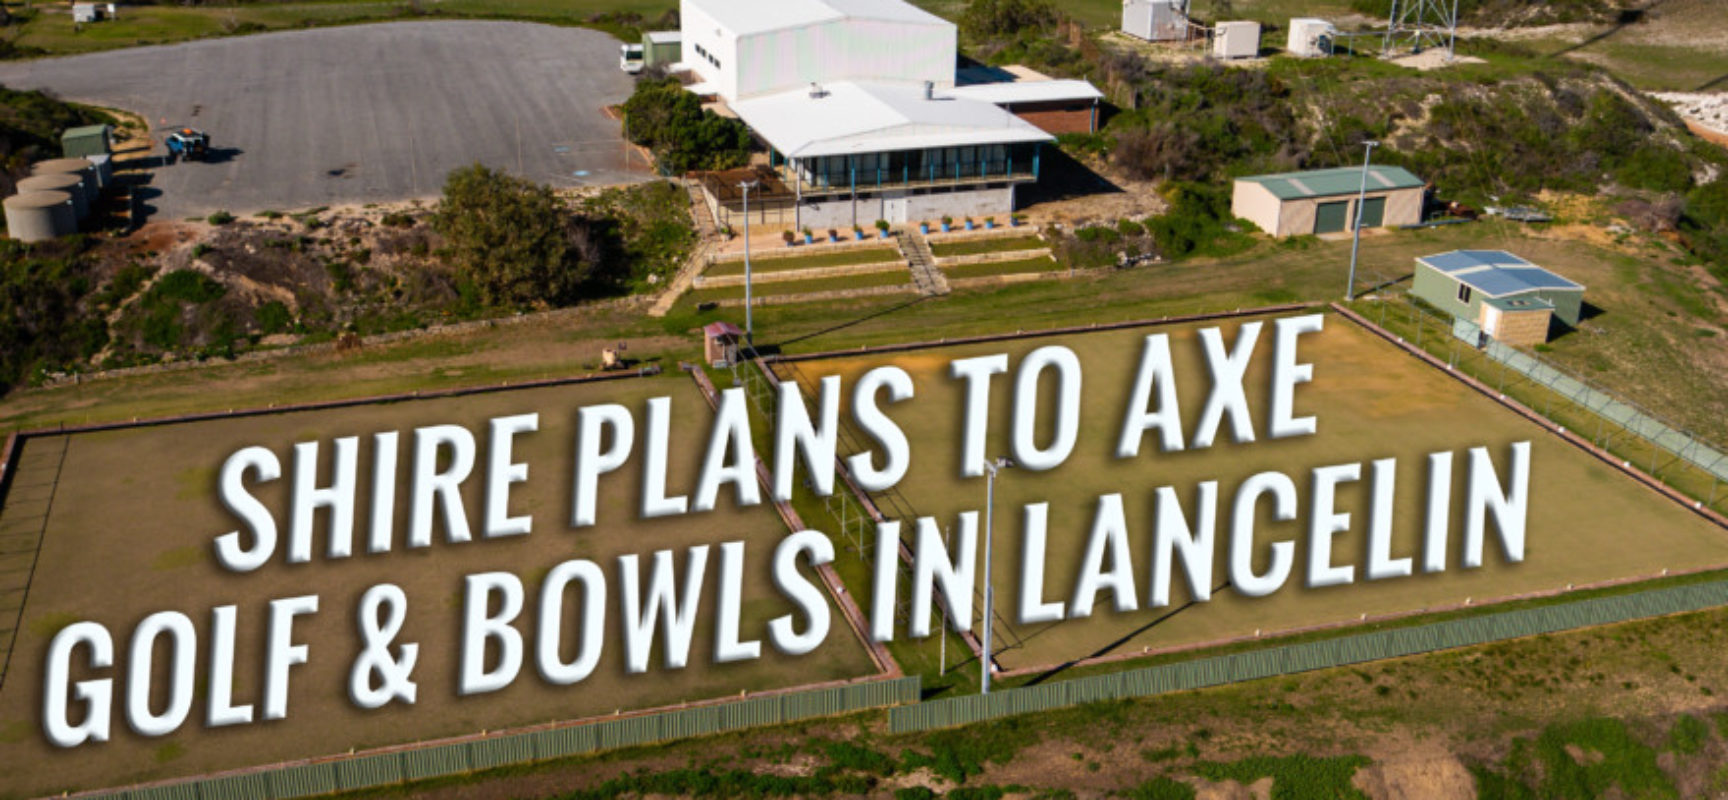 GOLF AND BOWLS COULD WELL BE AXED IN LANCELIN